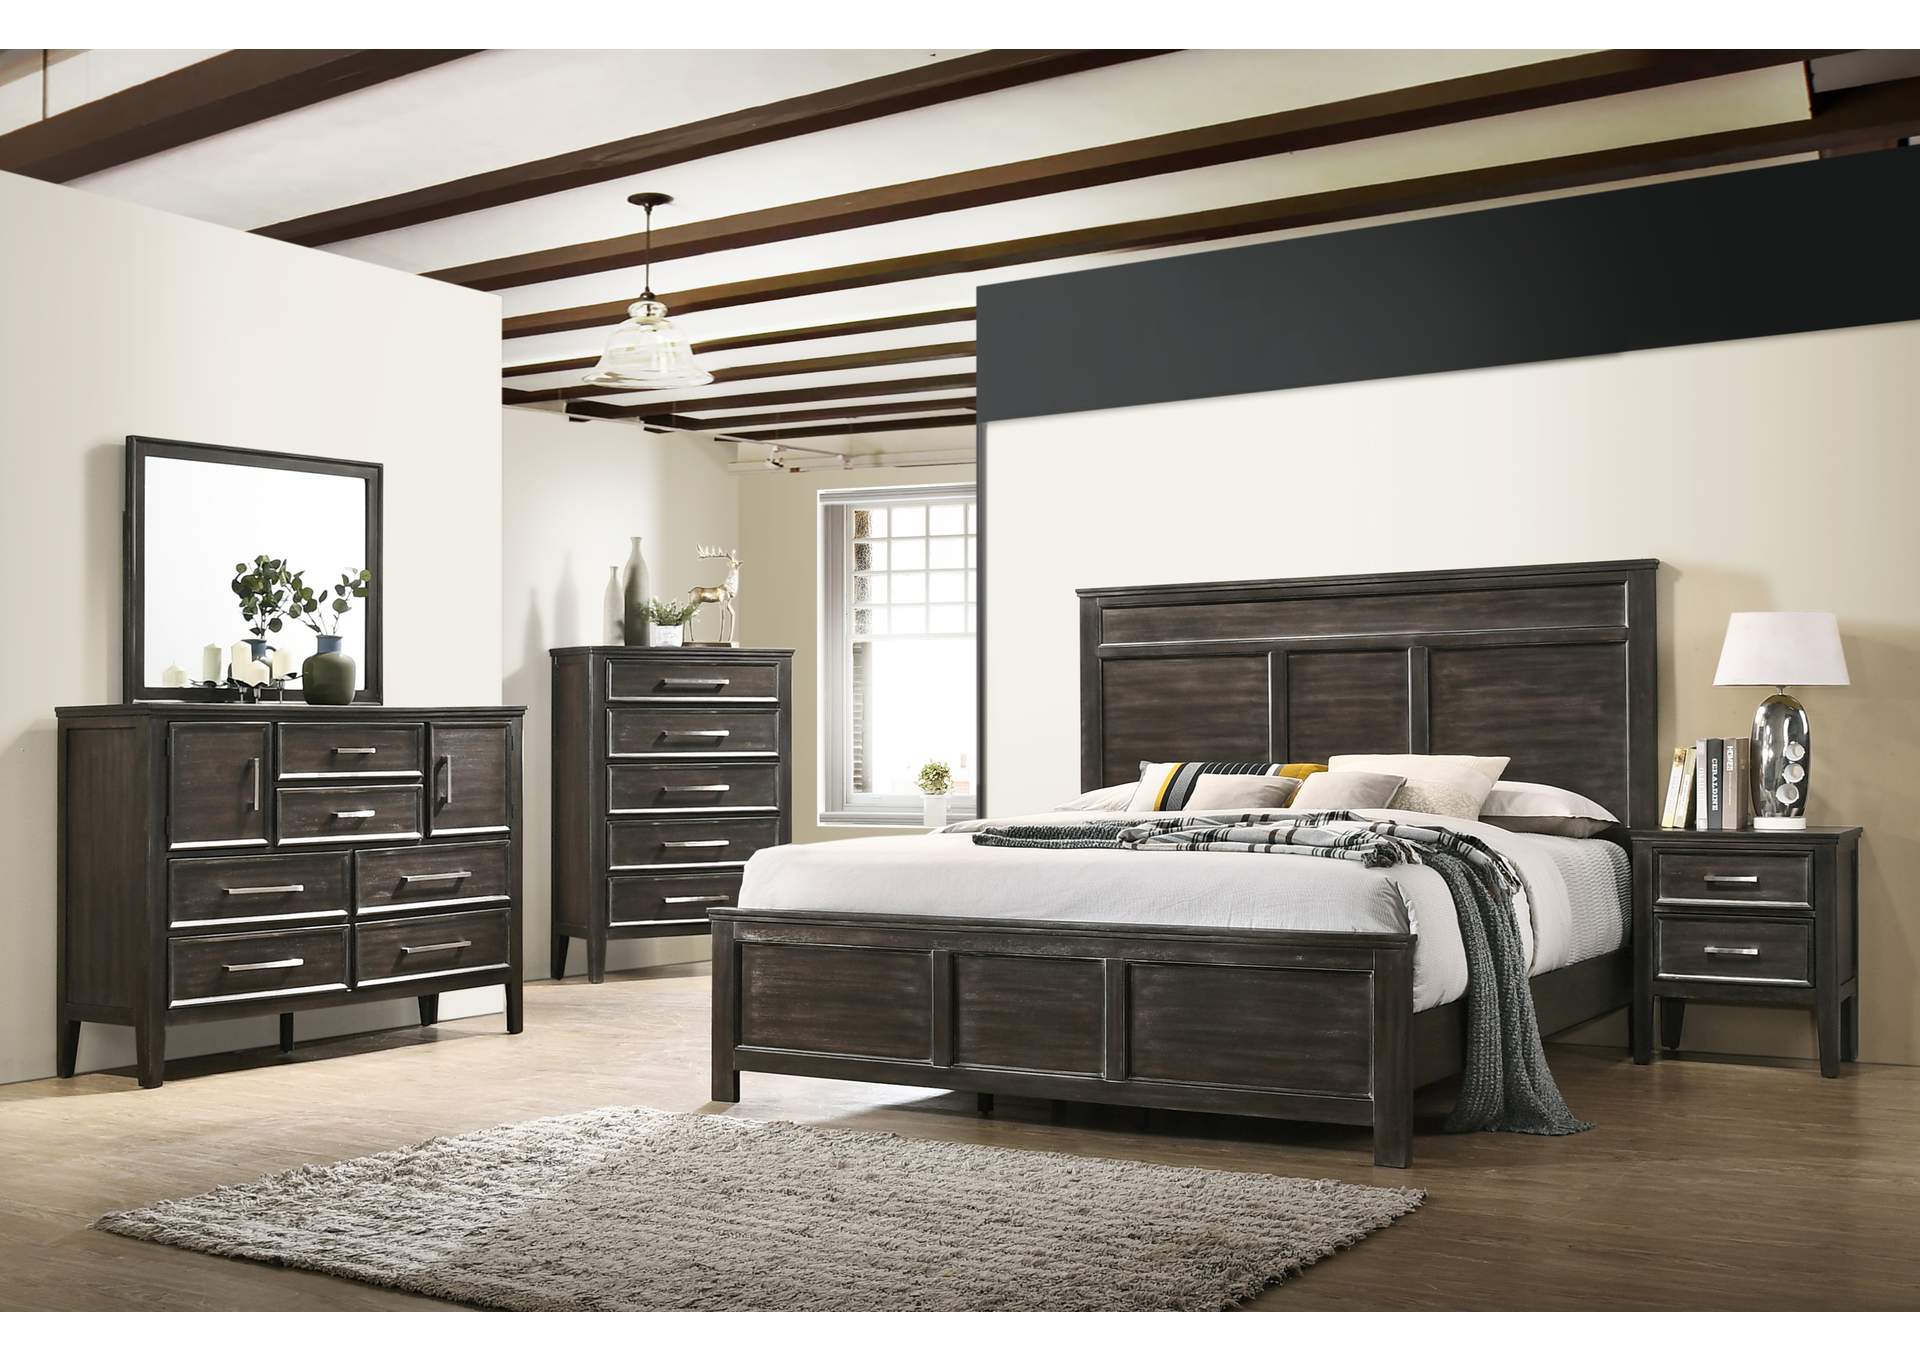 Andover Nutmeg Twin Bed,New Classic